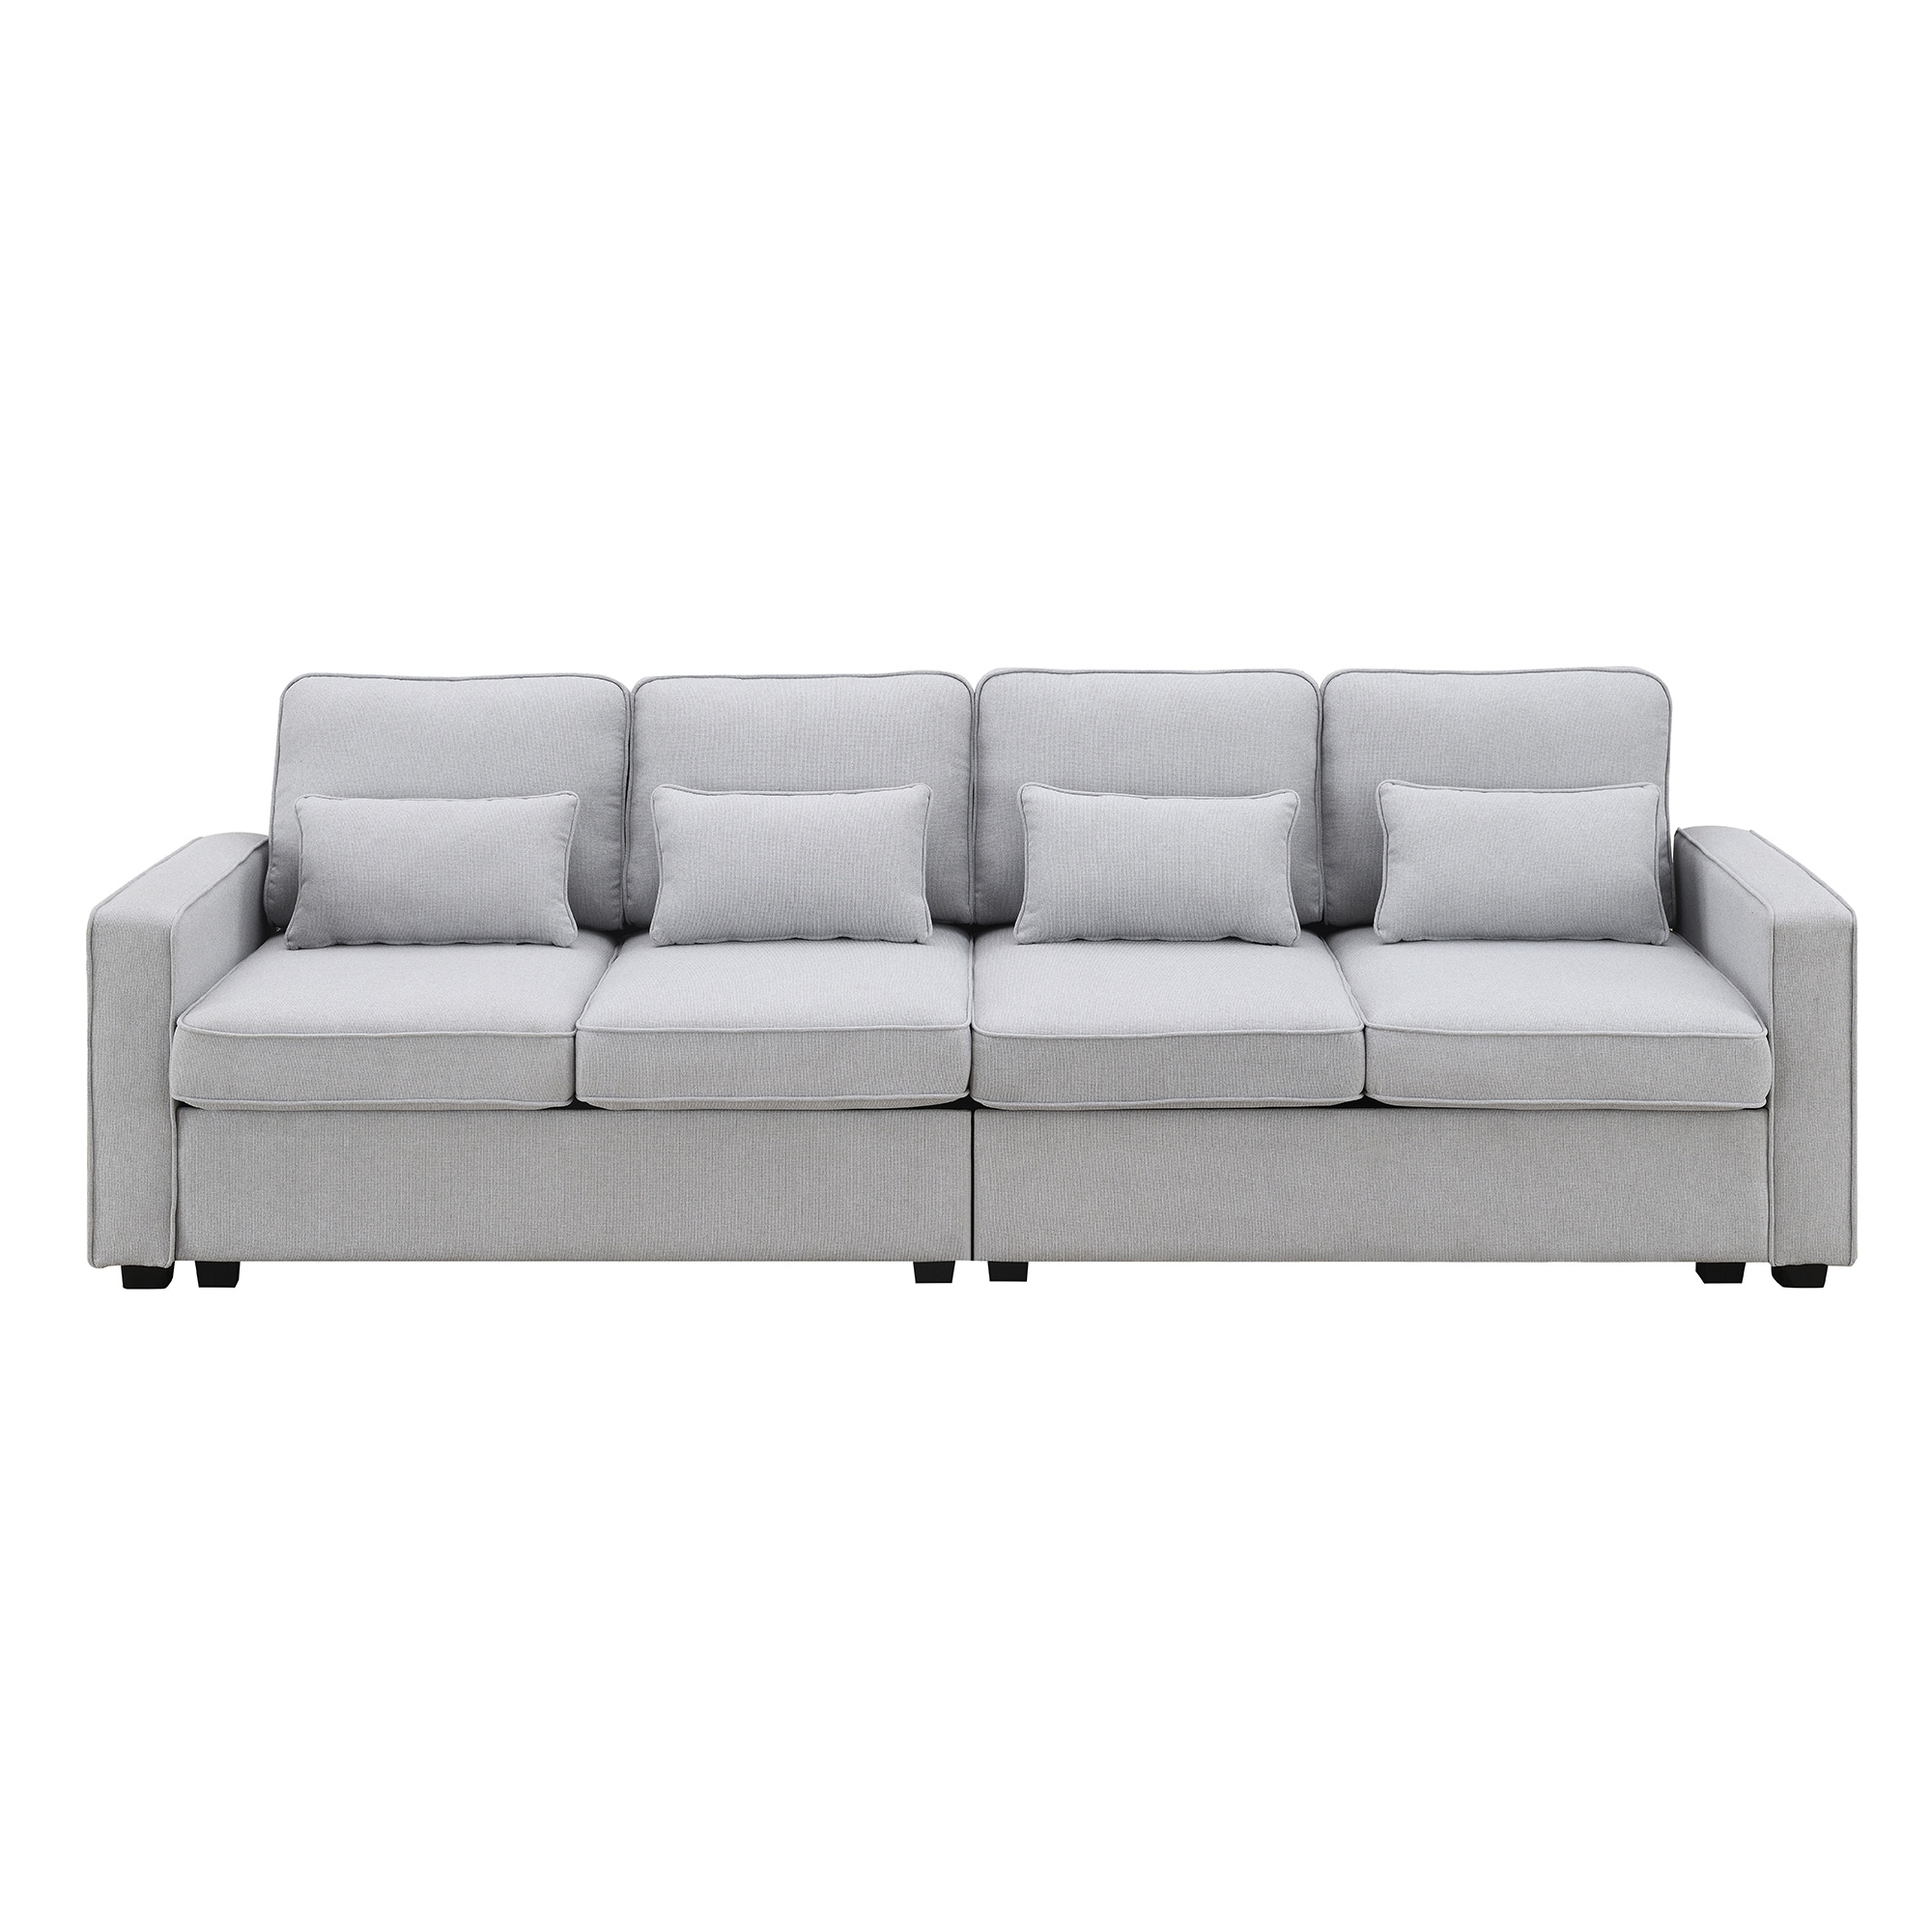 https://ak1.ostkcdn.com/images/products/is/images/direct/f64688287afafc84e4da3e95f2ee1744635c80aa/Contemporary-and-Spacious-4-Seater-Linen-Fabric-Sofa-with-Storage-Pockets-and-Pillows-Stylish-and-Functional-Design.jpg